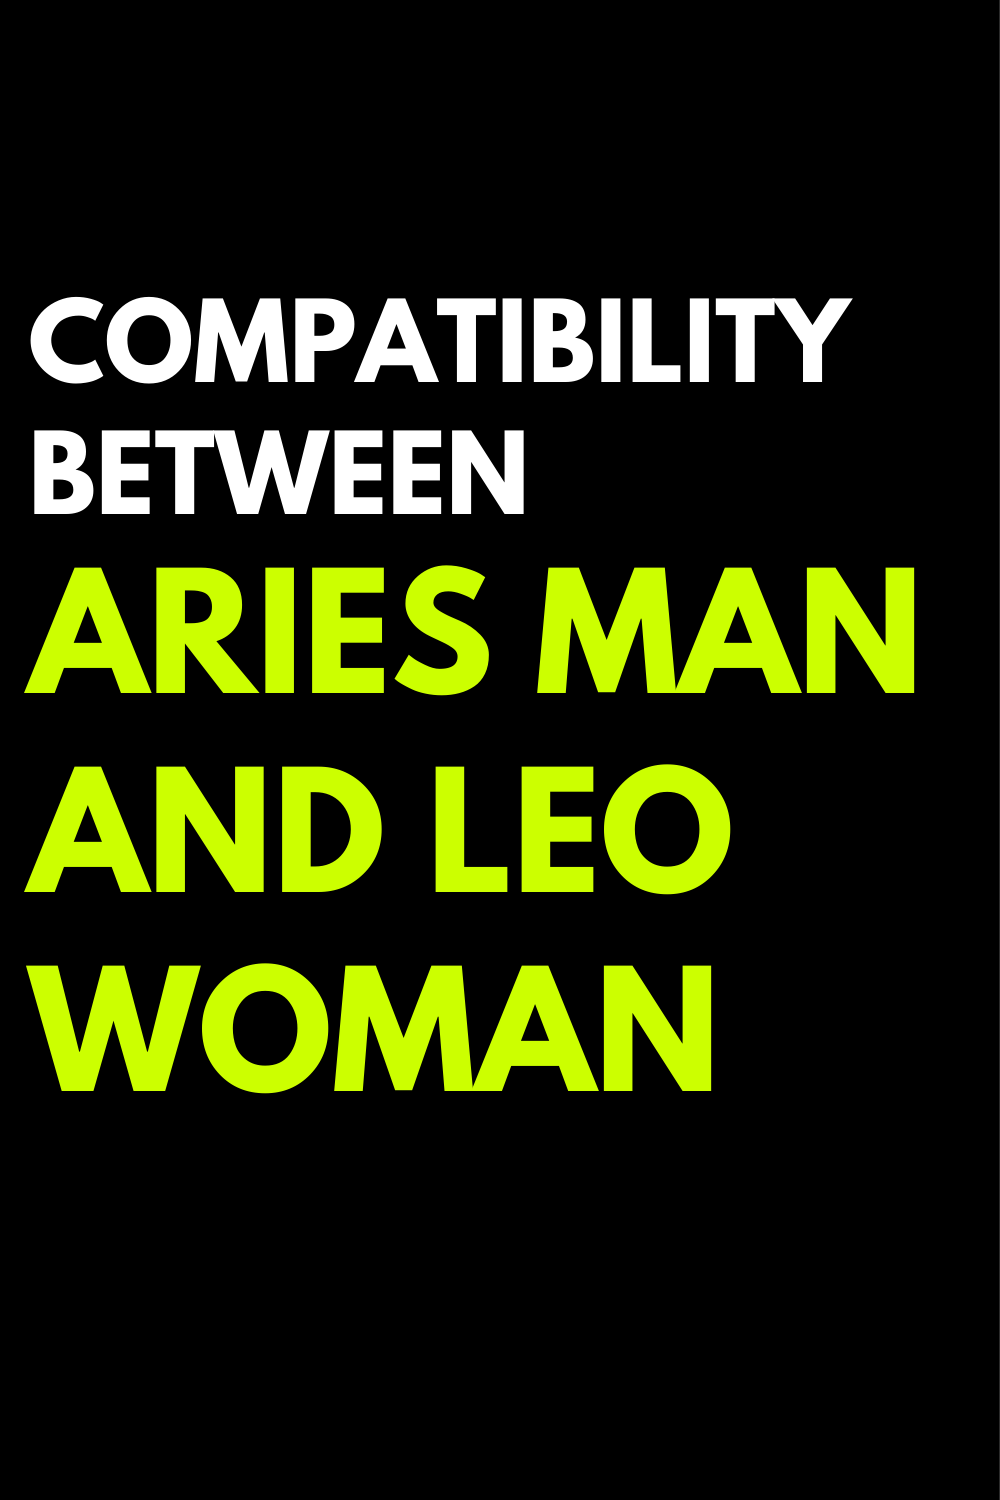 Compatibility between Aries man and Leo woman